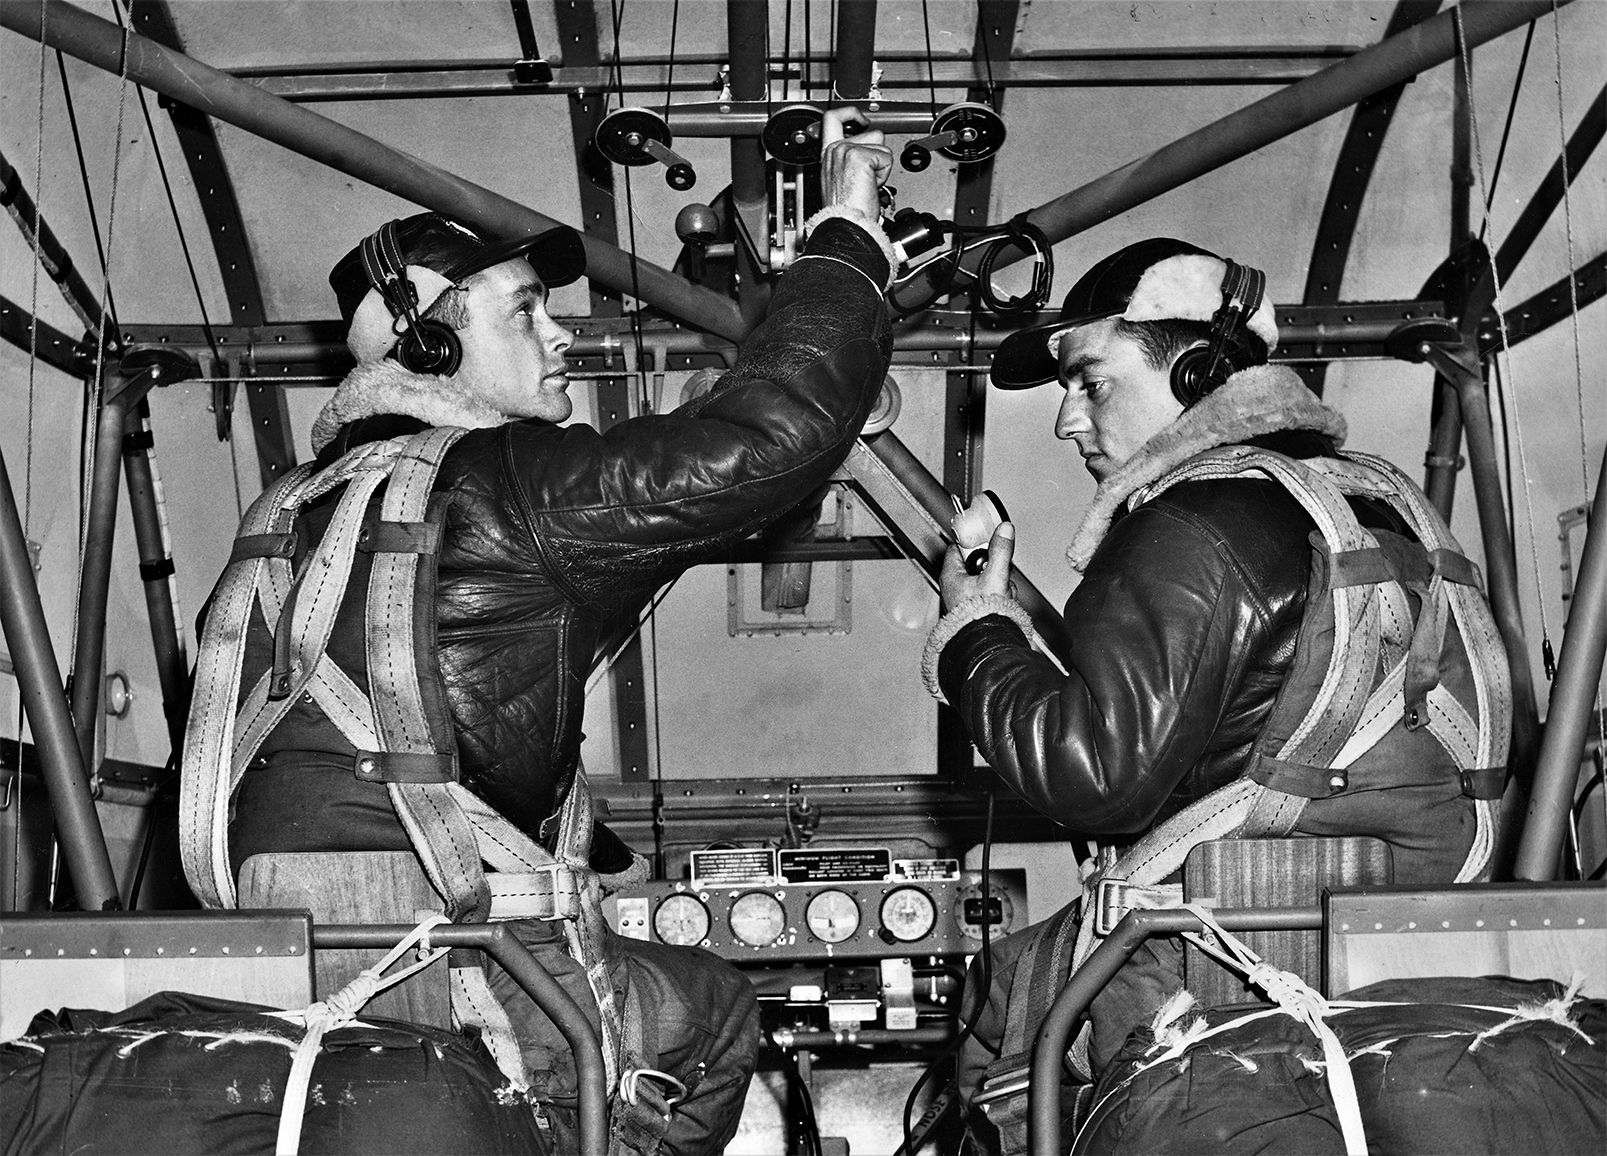 Volunteer glider pilots were exposed to enemy fire on three sides through Plexiglas as they landed. They often were released at about 500 feet and had only seconds to land.